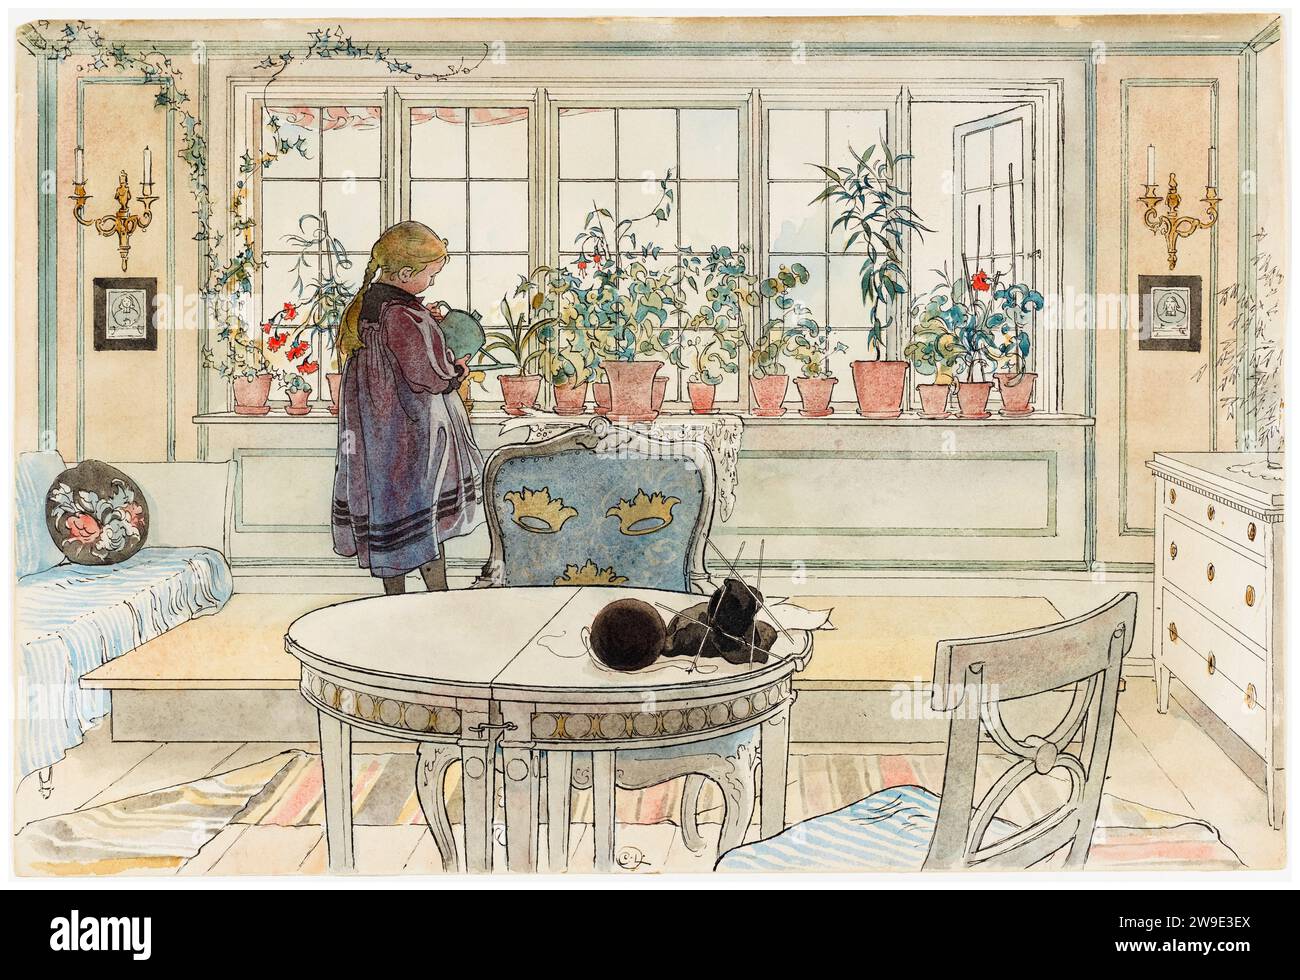 Carl Larsson painting, Flowers on the Windowsill, From the series: 'A Home' (26 watercolours), watercolour, 1894-1895 Stock Photo